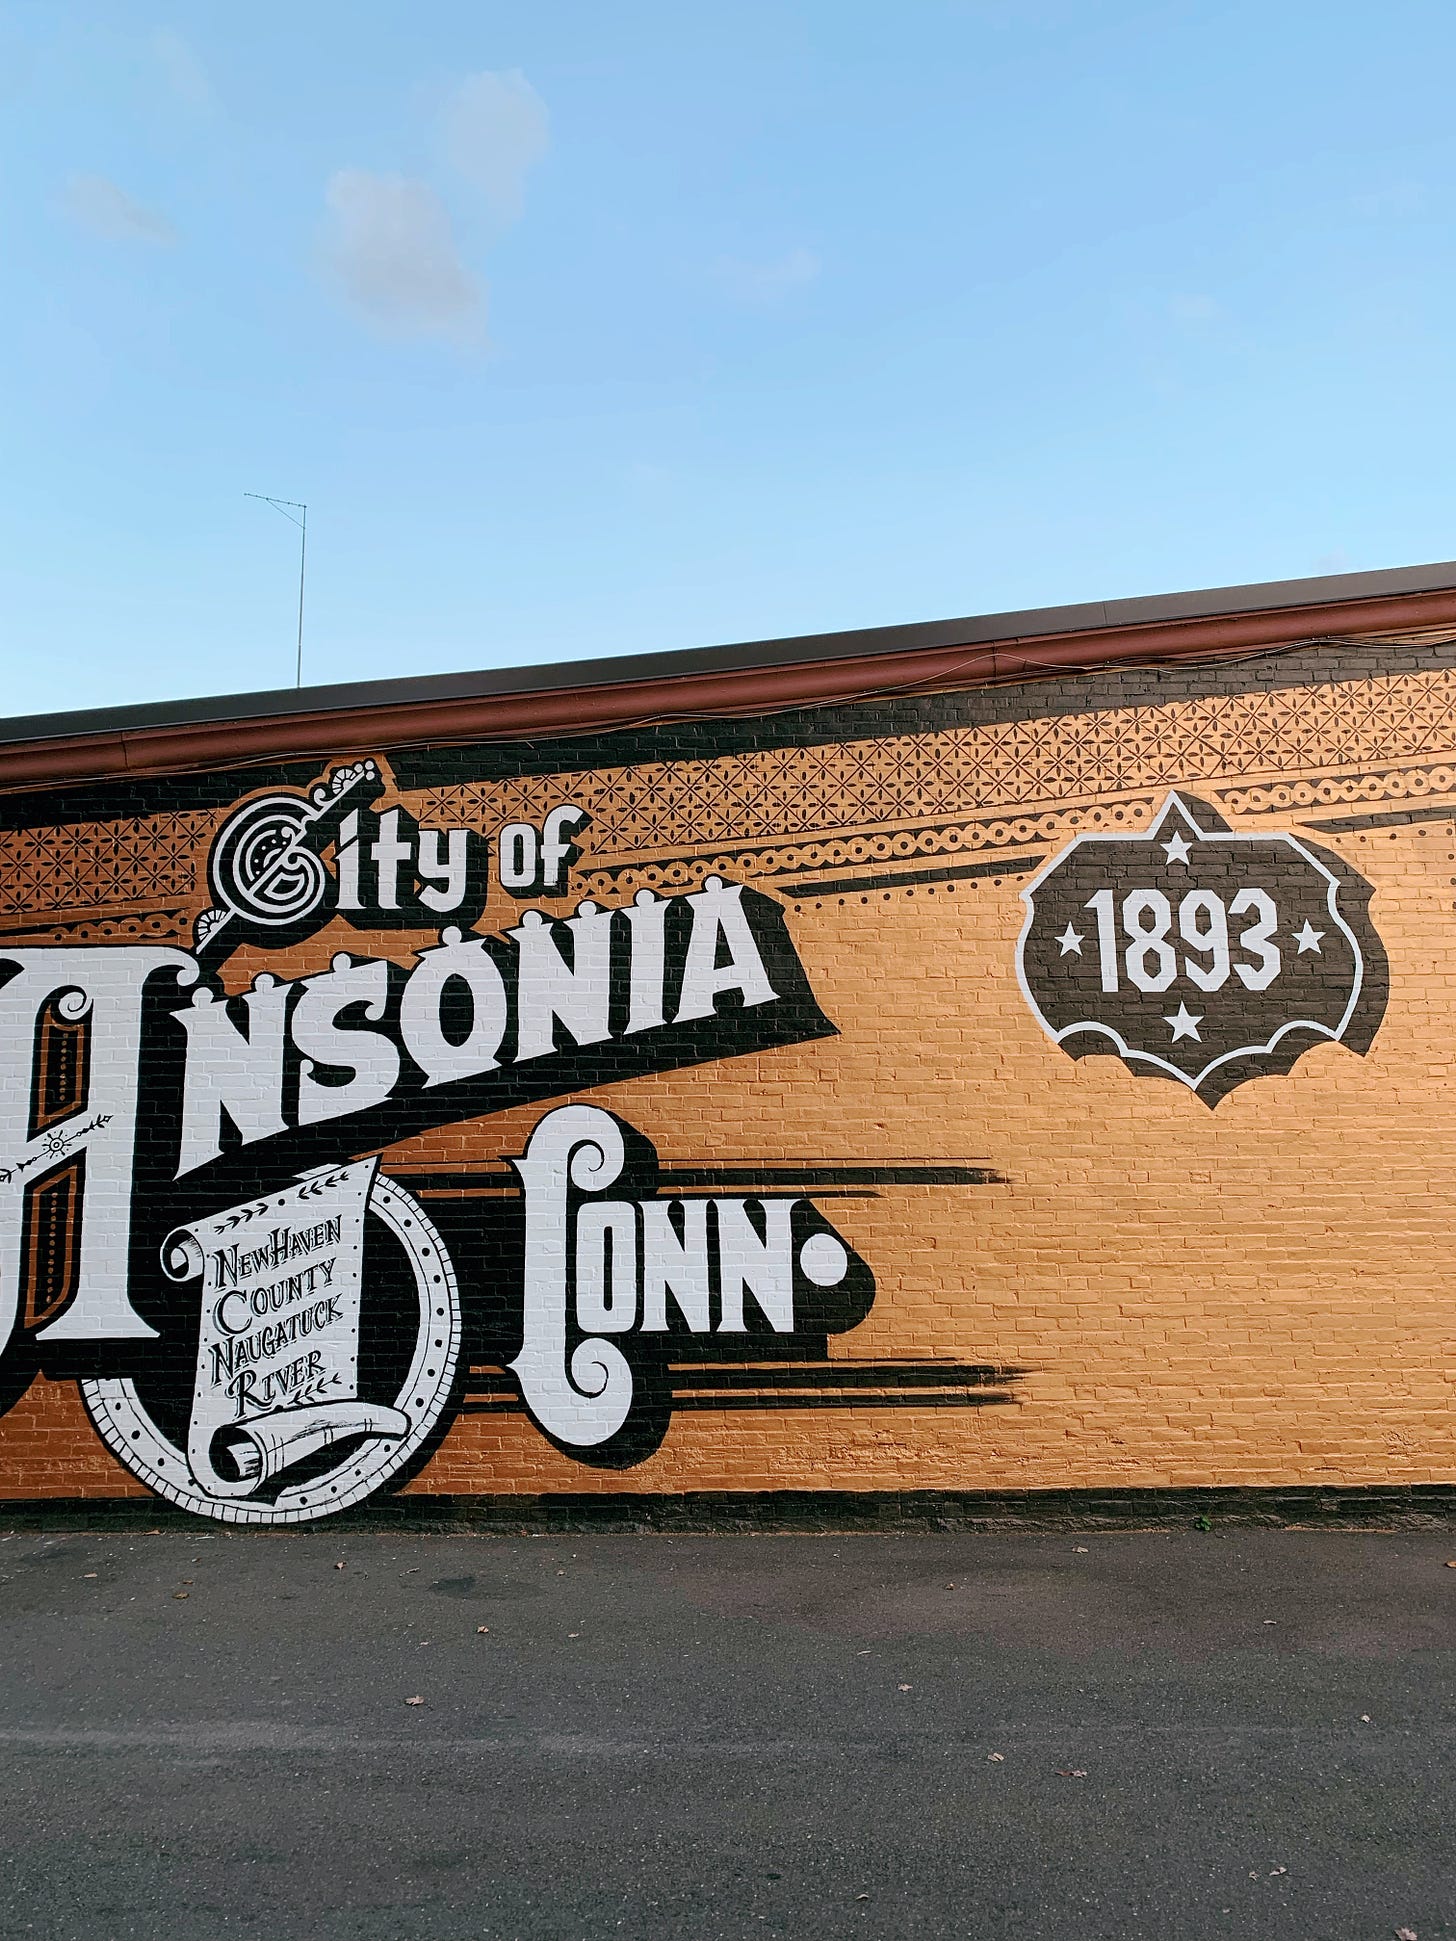 Painted mural saying "City of Ansonia 1893"